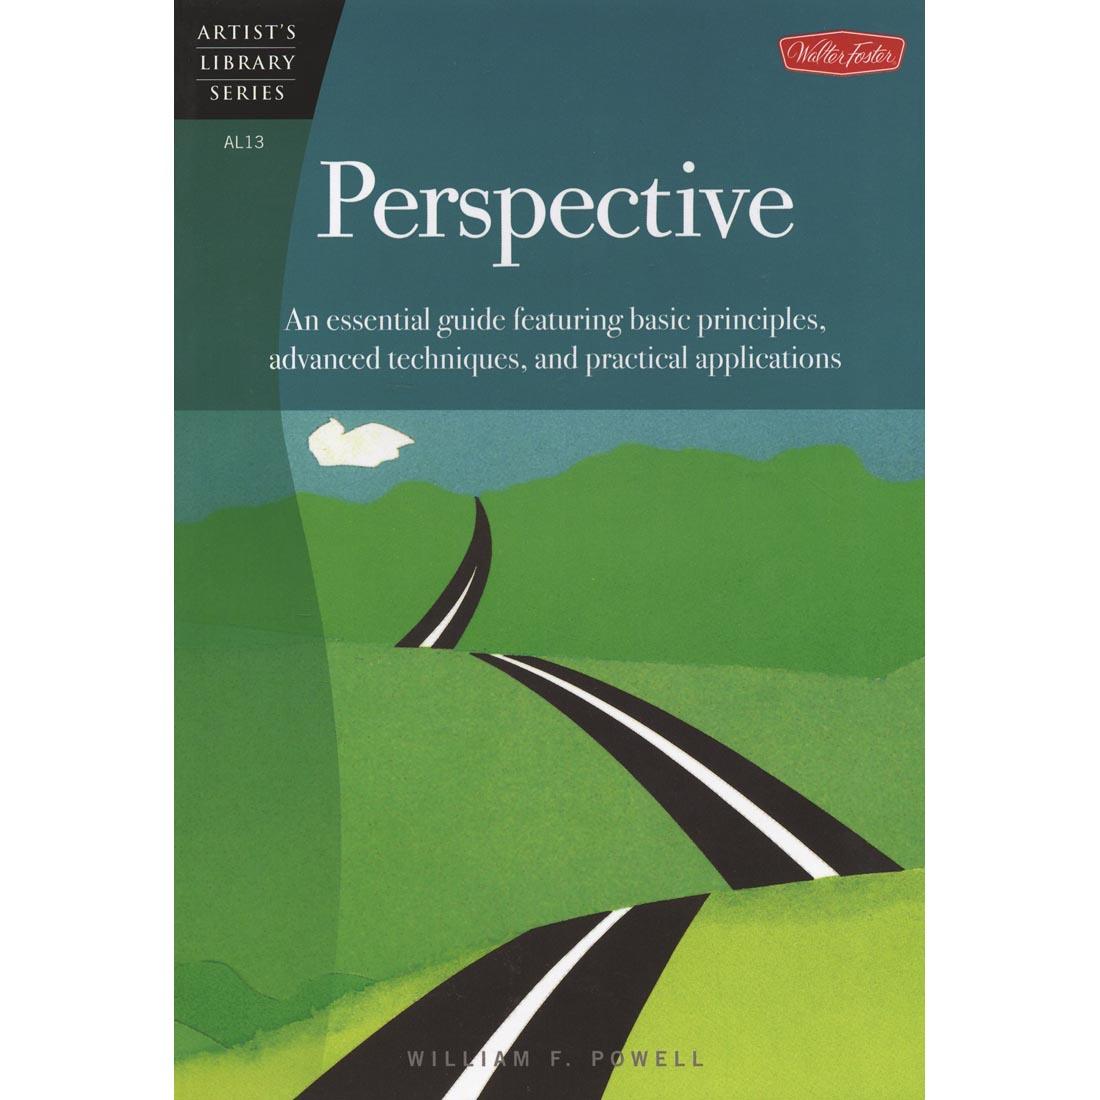 cover of book - Artist's Library Series: Perspective